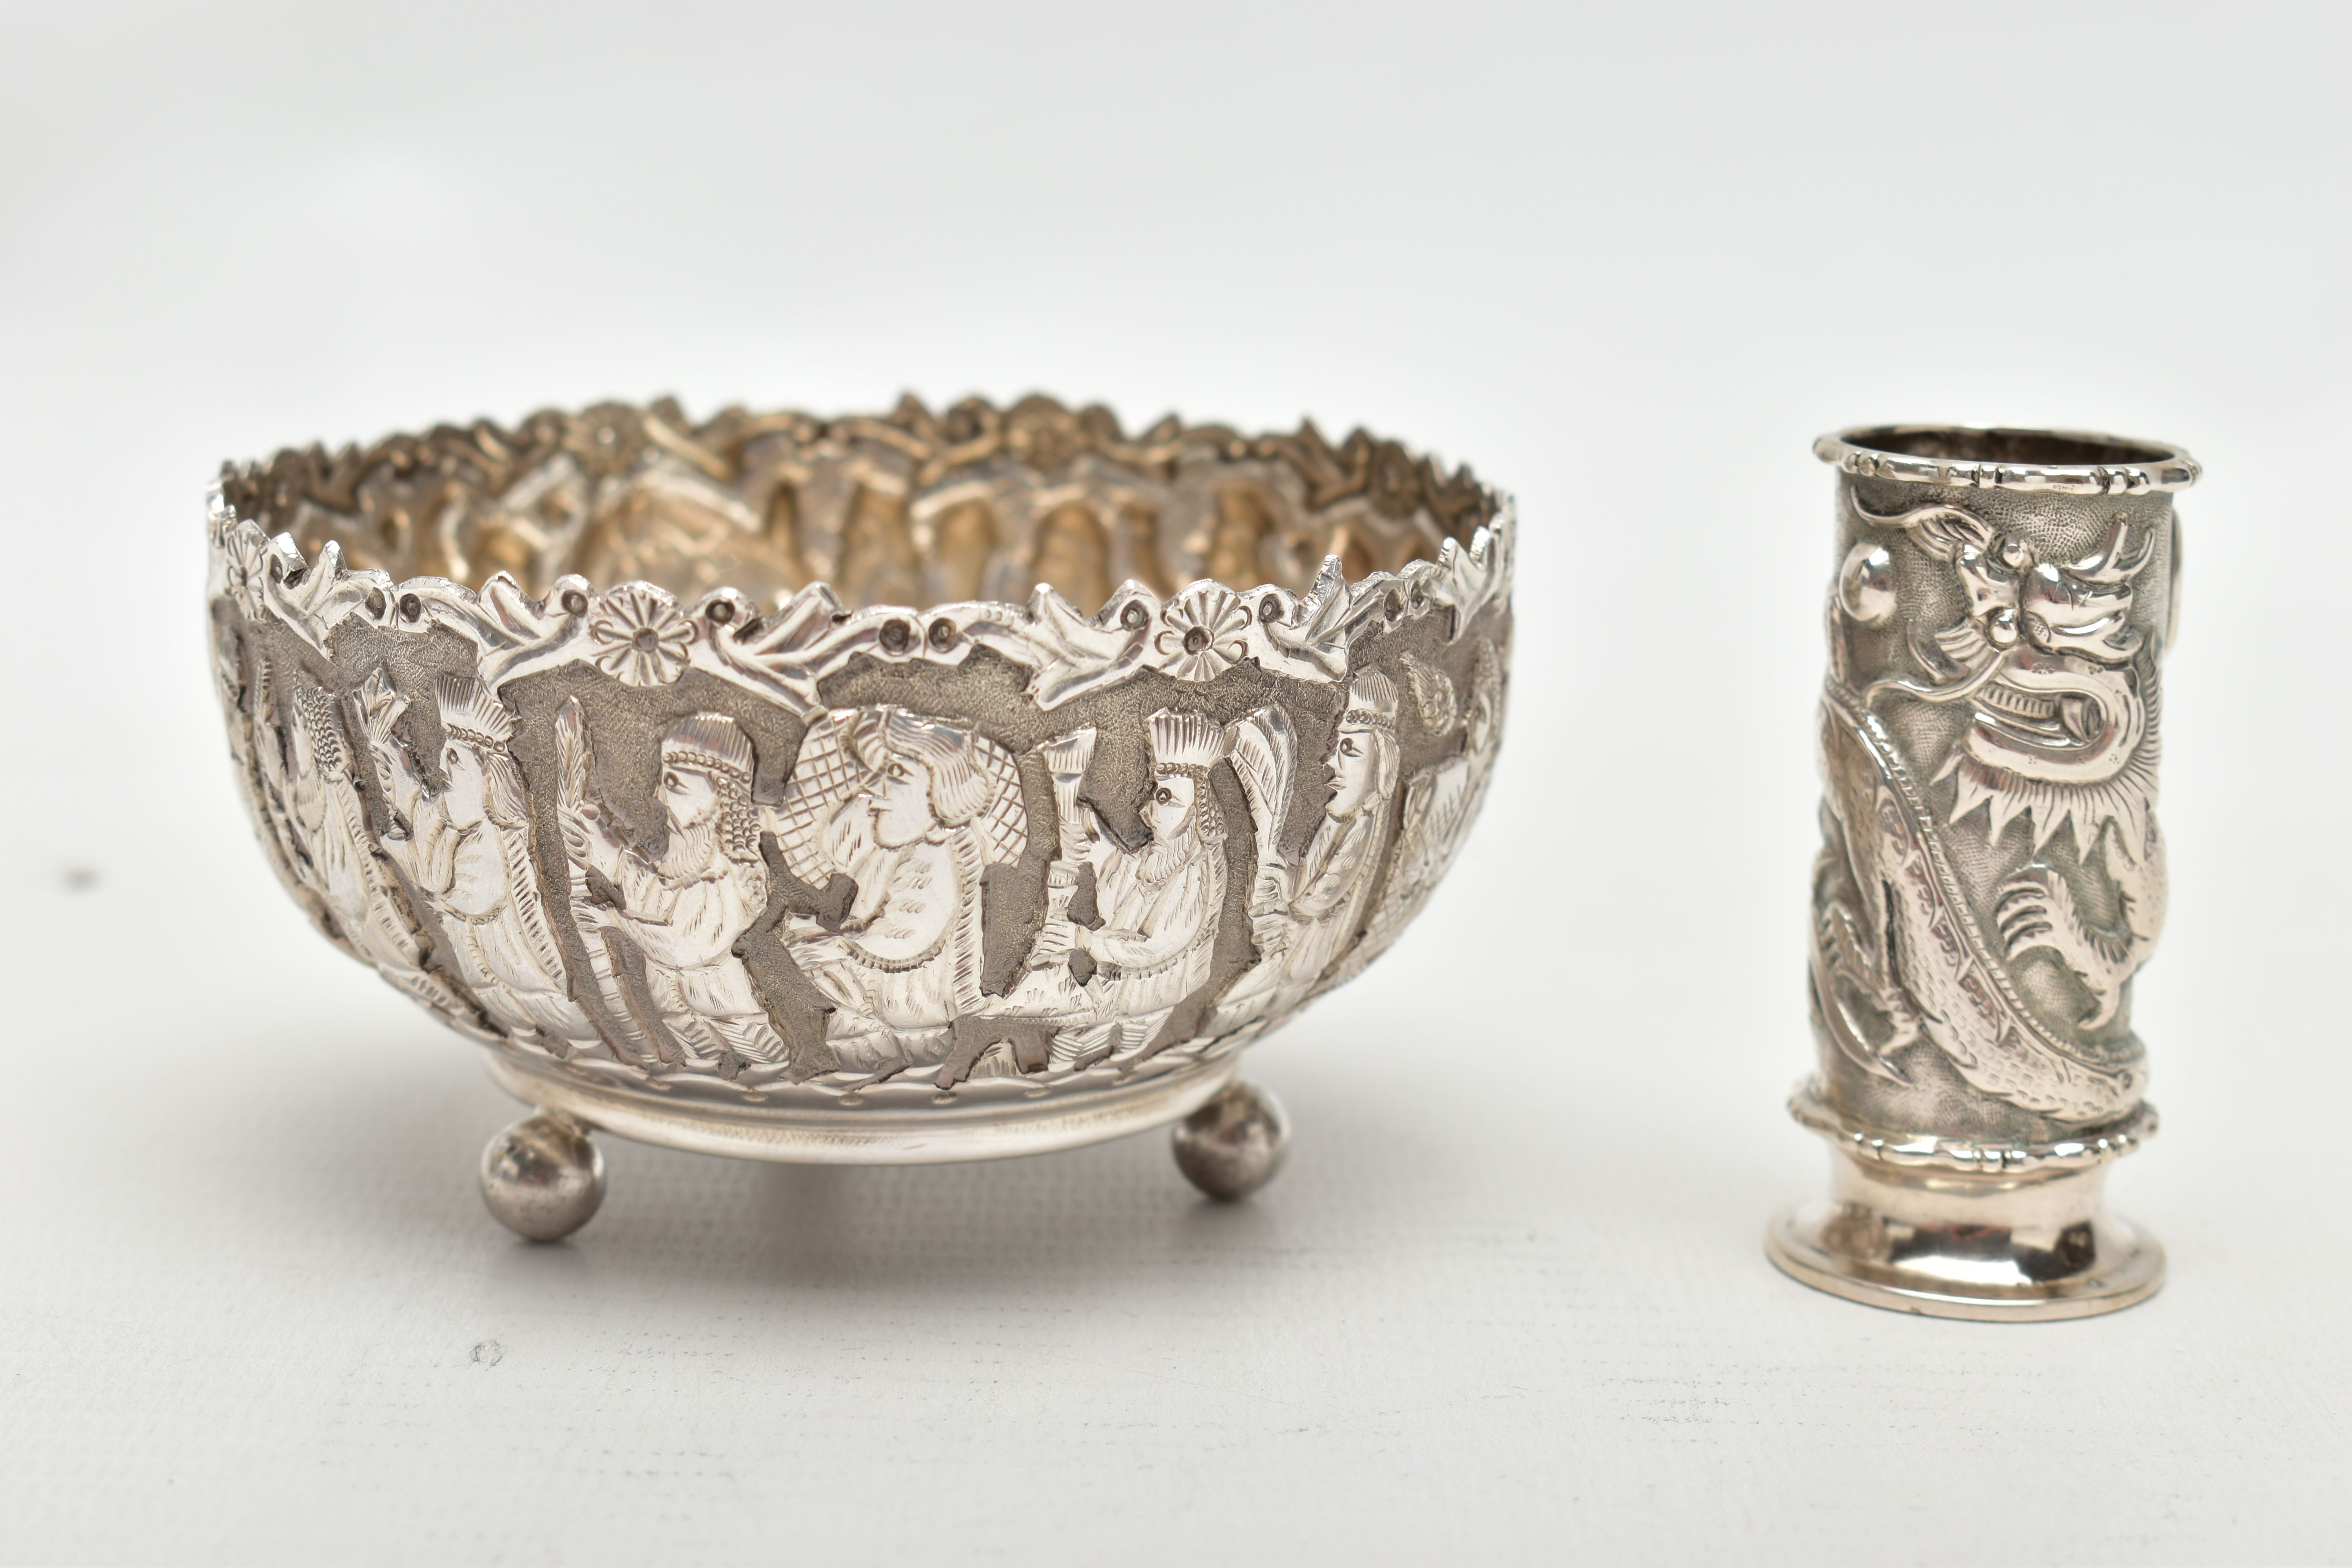 AN EMBOSSED WHITE METAL BOWL AND SMALL VASE, the round bowl decorated with embossed multiple figural